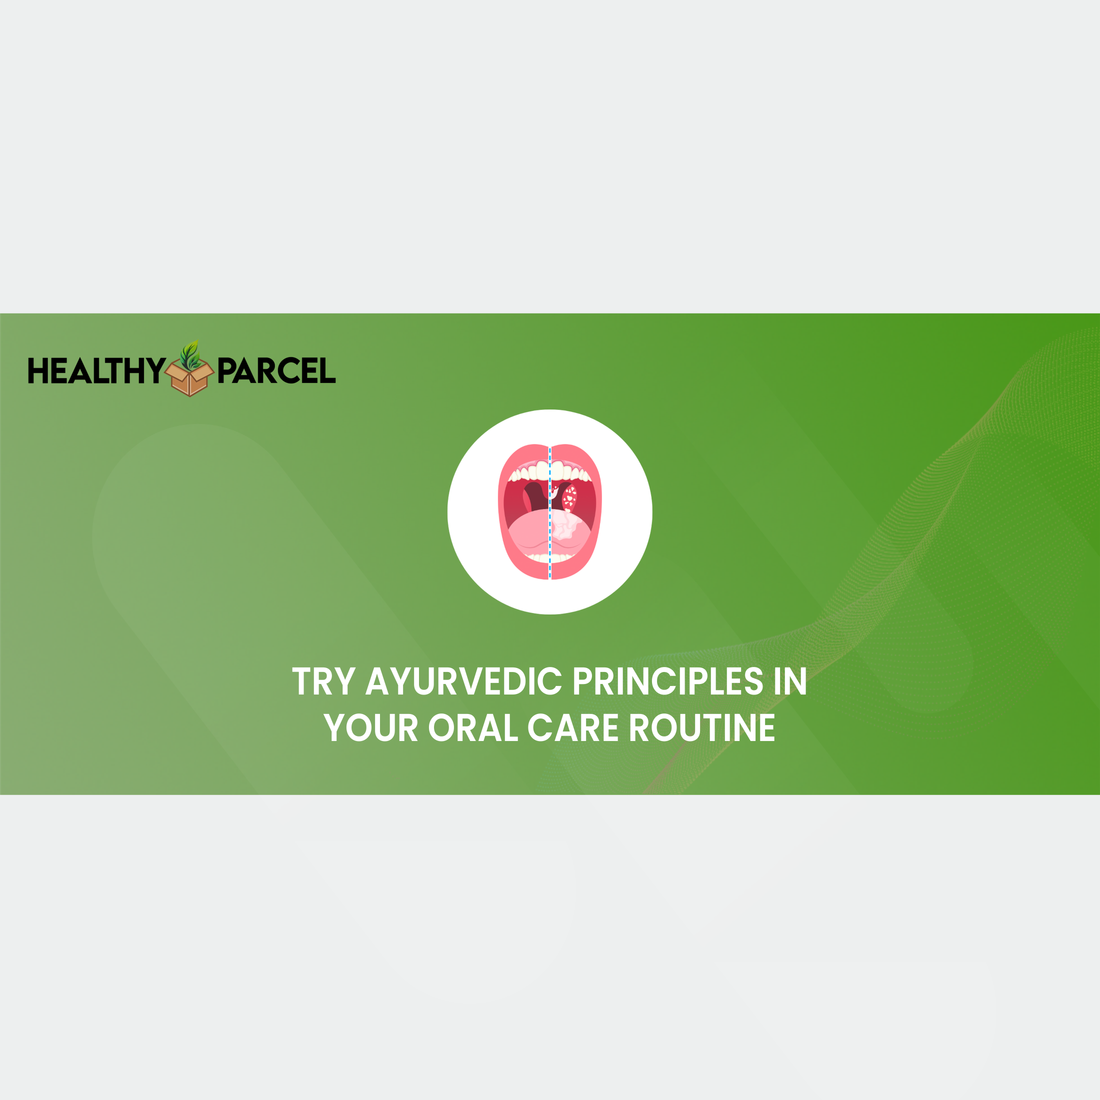 Try Ayurvedic Principles in Your Oral Care Routine